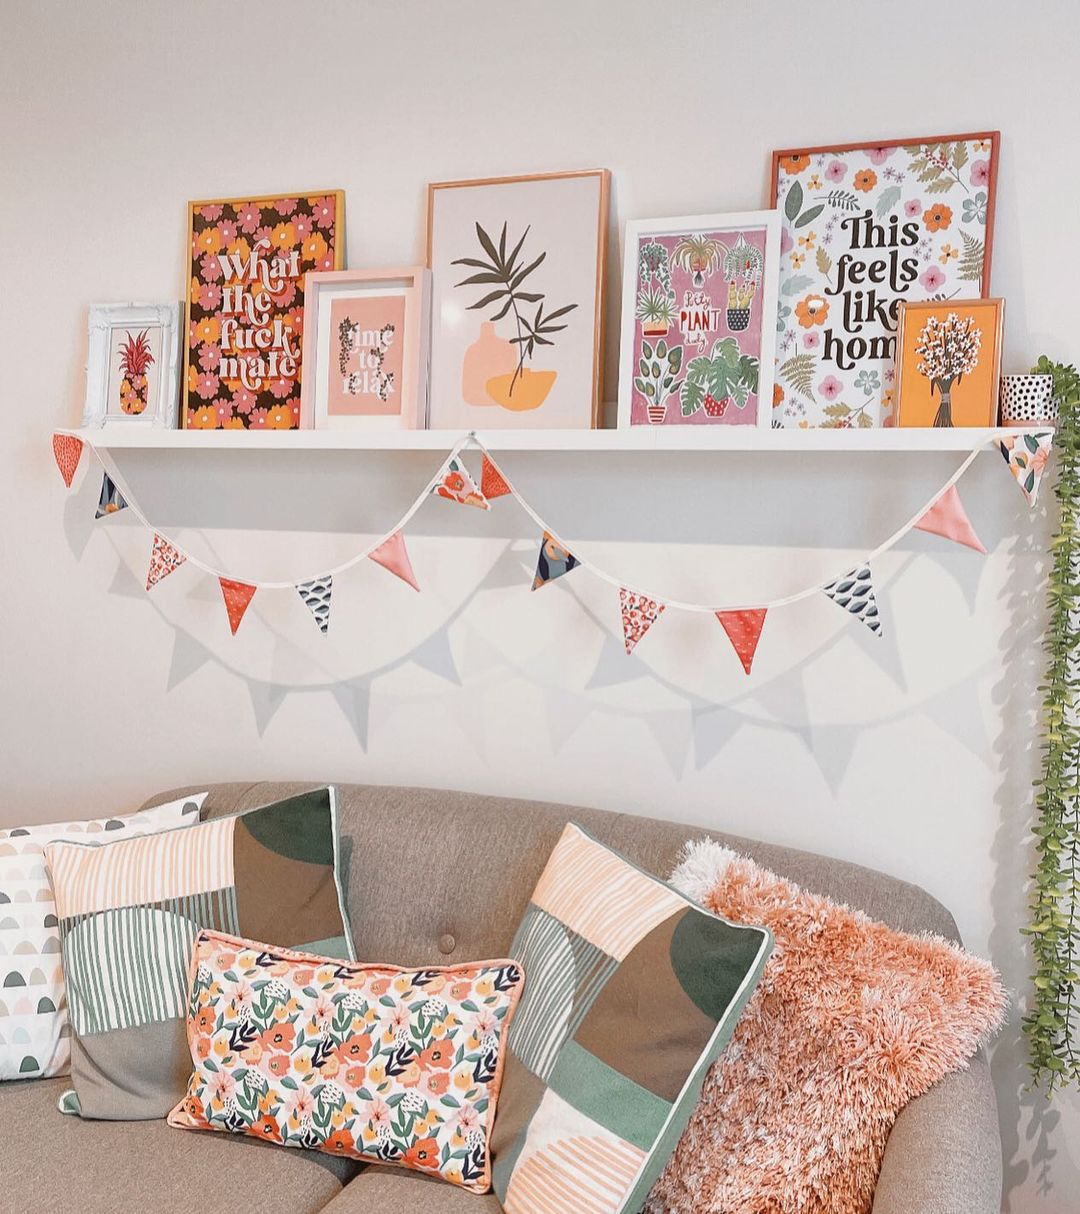 Colorful Living Room with Playful Picture Ledge and Bunting